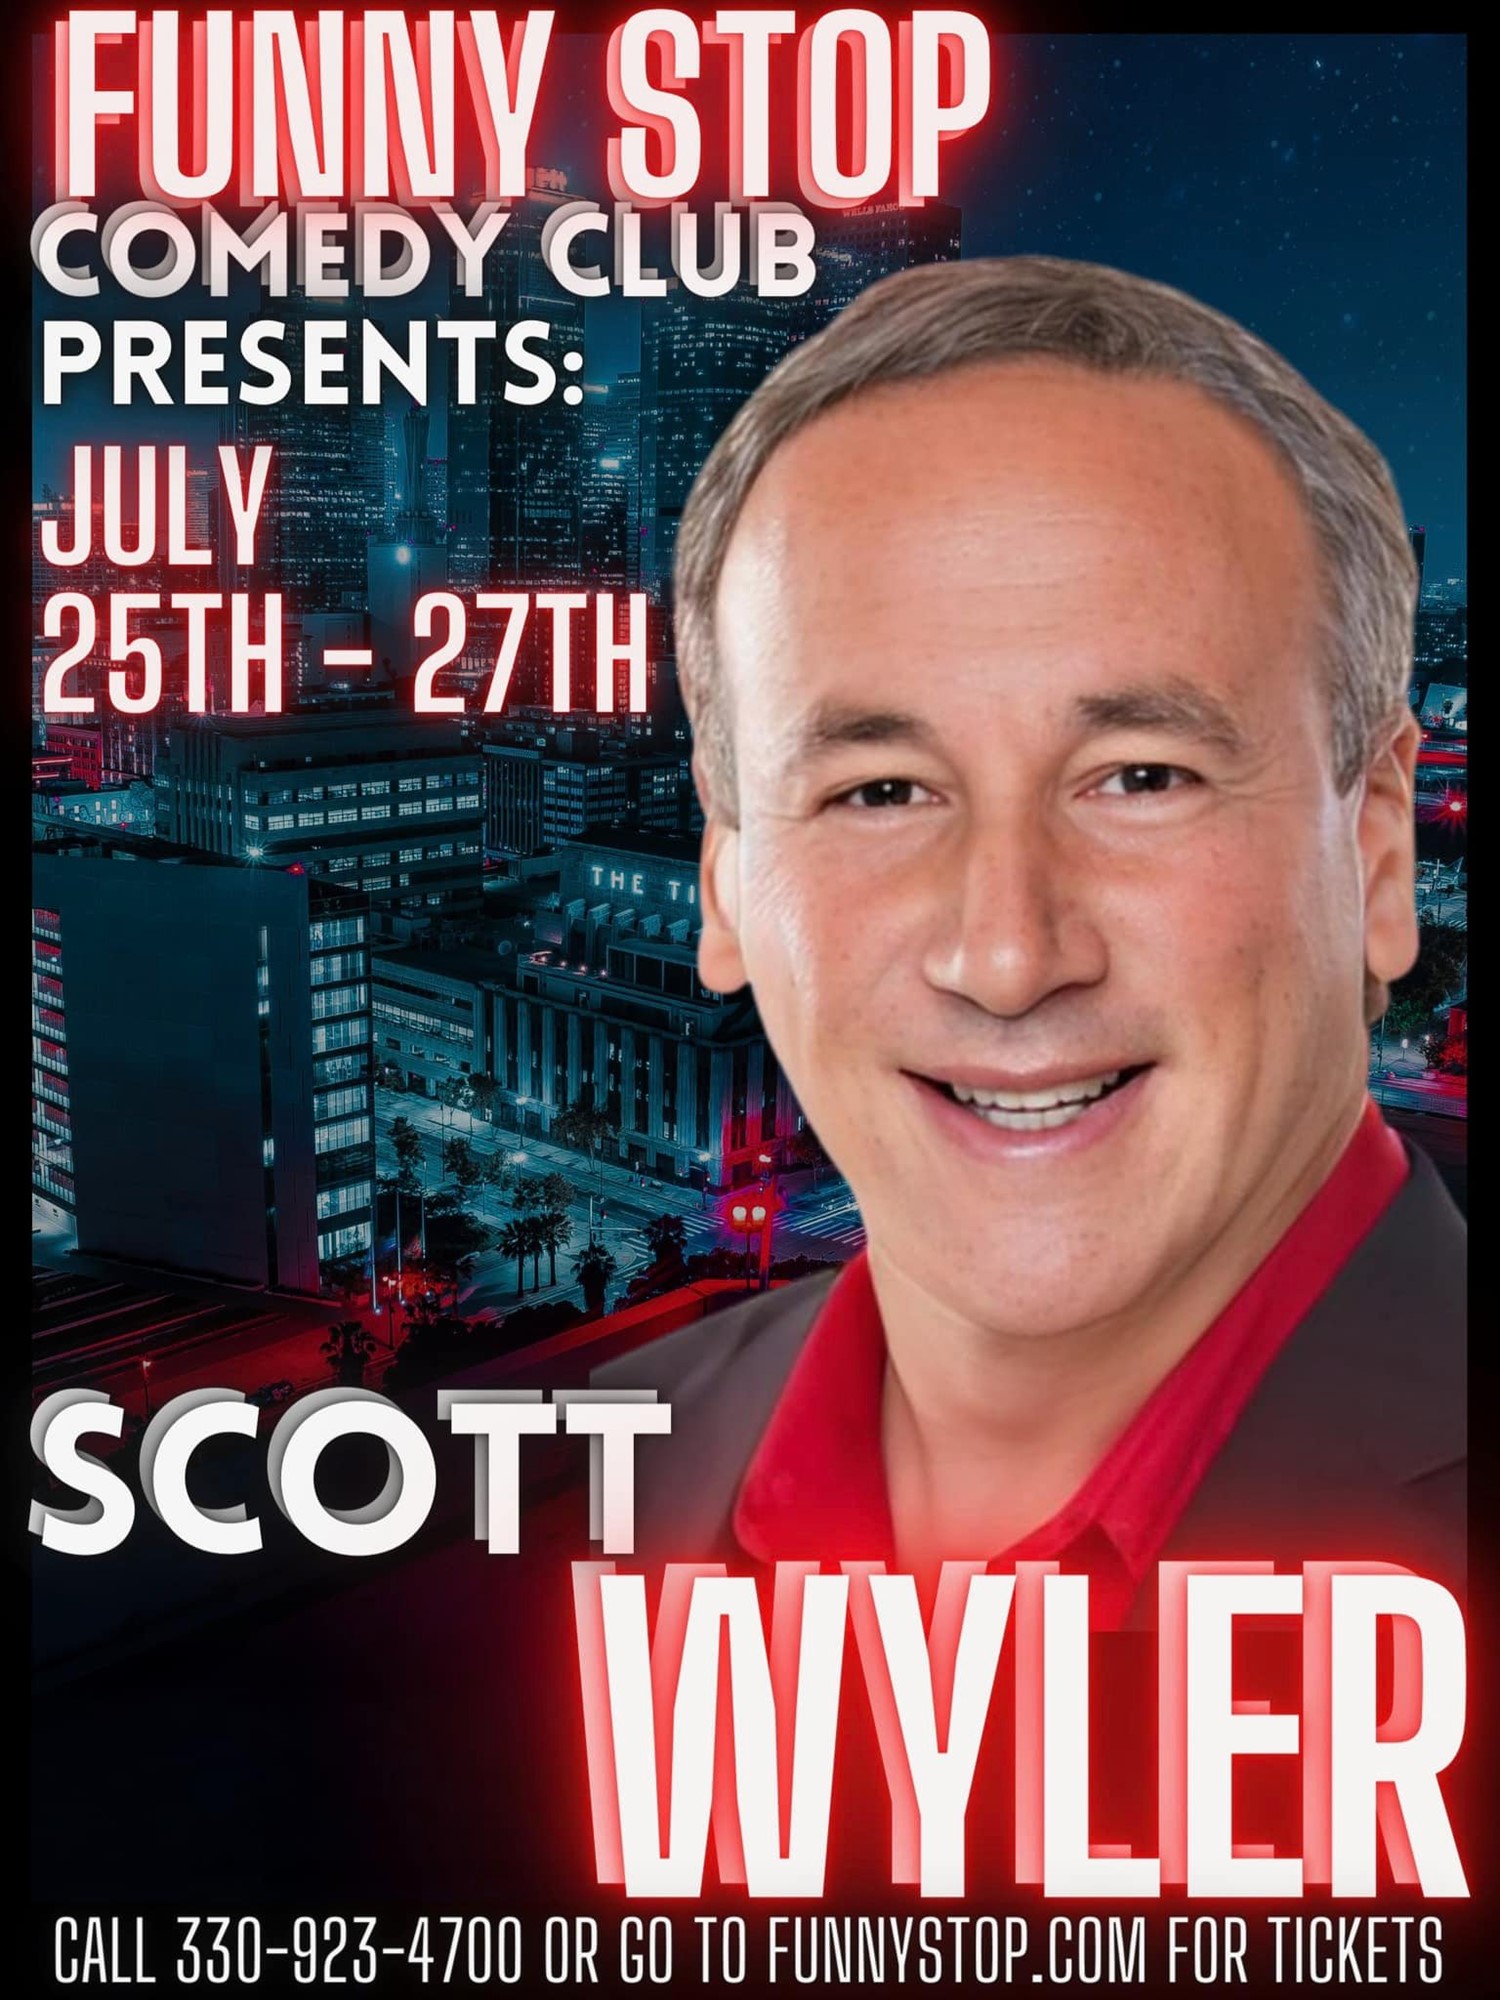 Scott Wyler - Sat. 7:30 PM Show Funny Stop Comedy Club on Jul 27, 19:30@Funny Stop Comedy Club - Buy tickets and Get information on Funny Stop funnystop.online